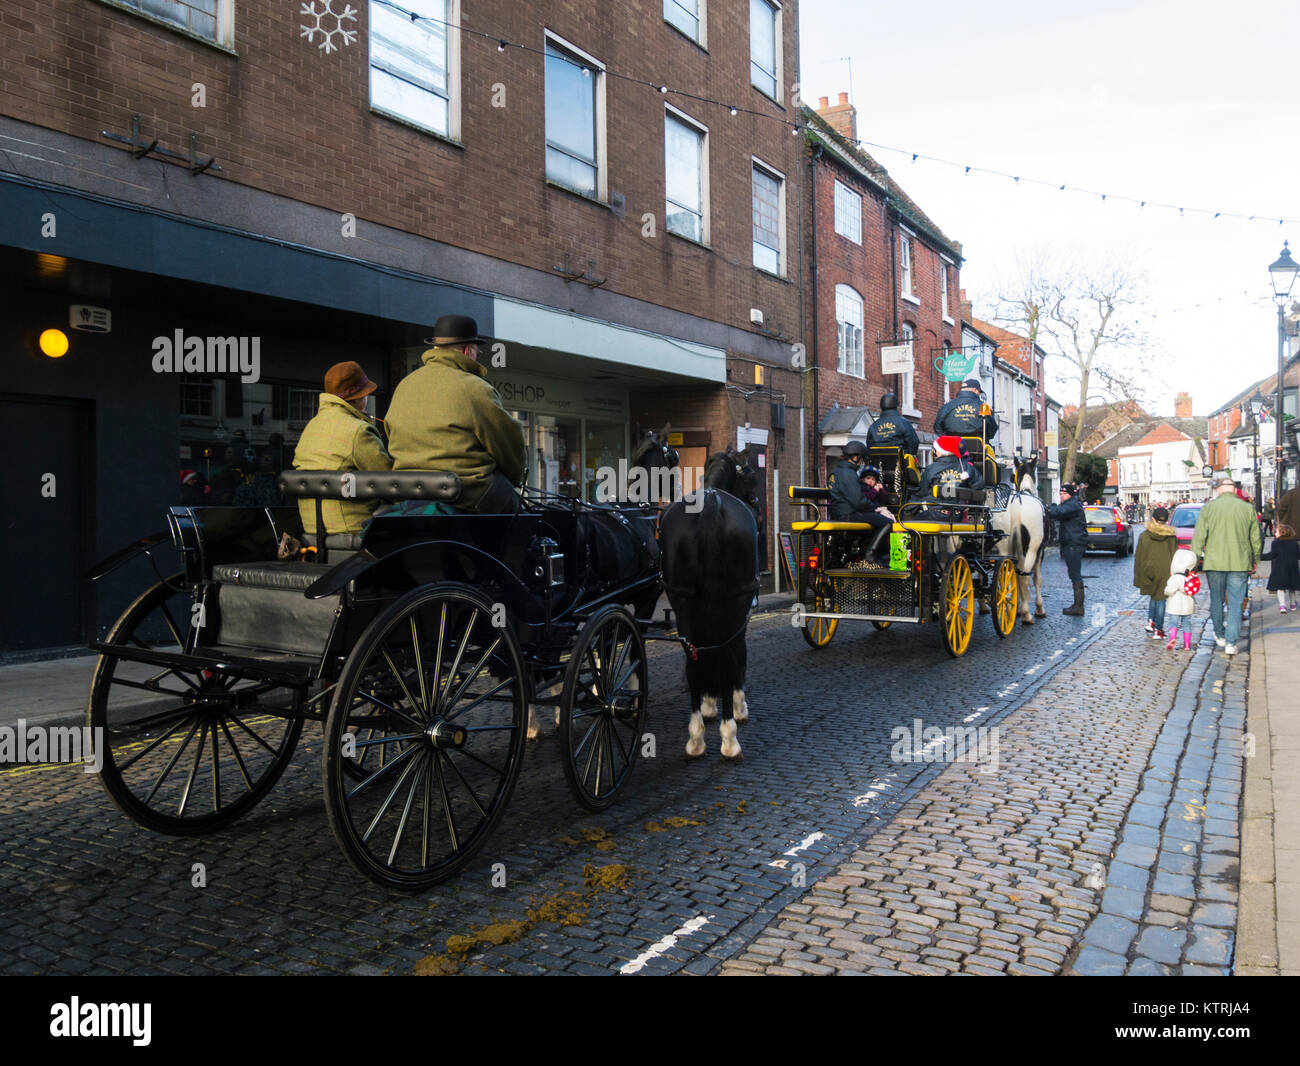 Horse drawn Carriages waiting in St Mary's Street Newport Shropshire England UK taking part in Albrighton and Woodland Hunt Boxing Day gathering Stock Photo